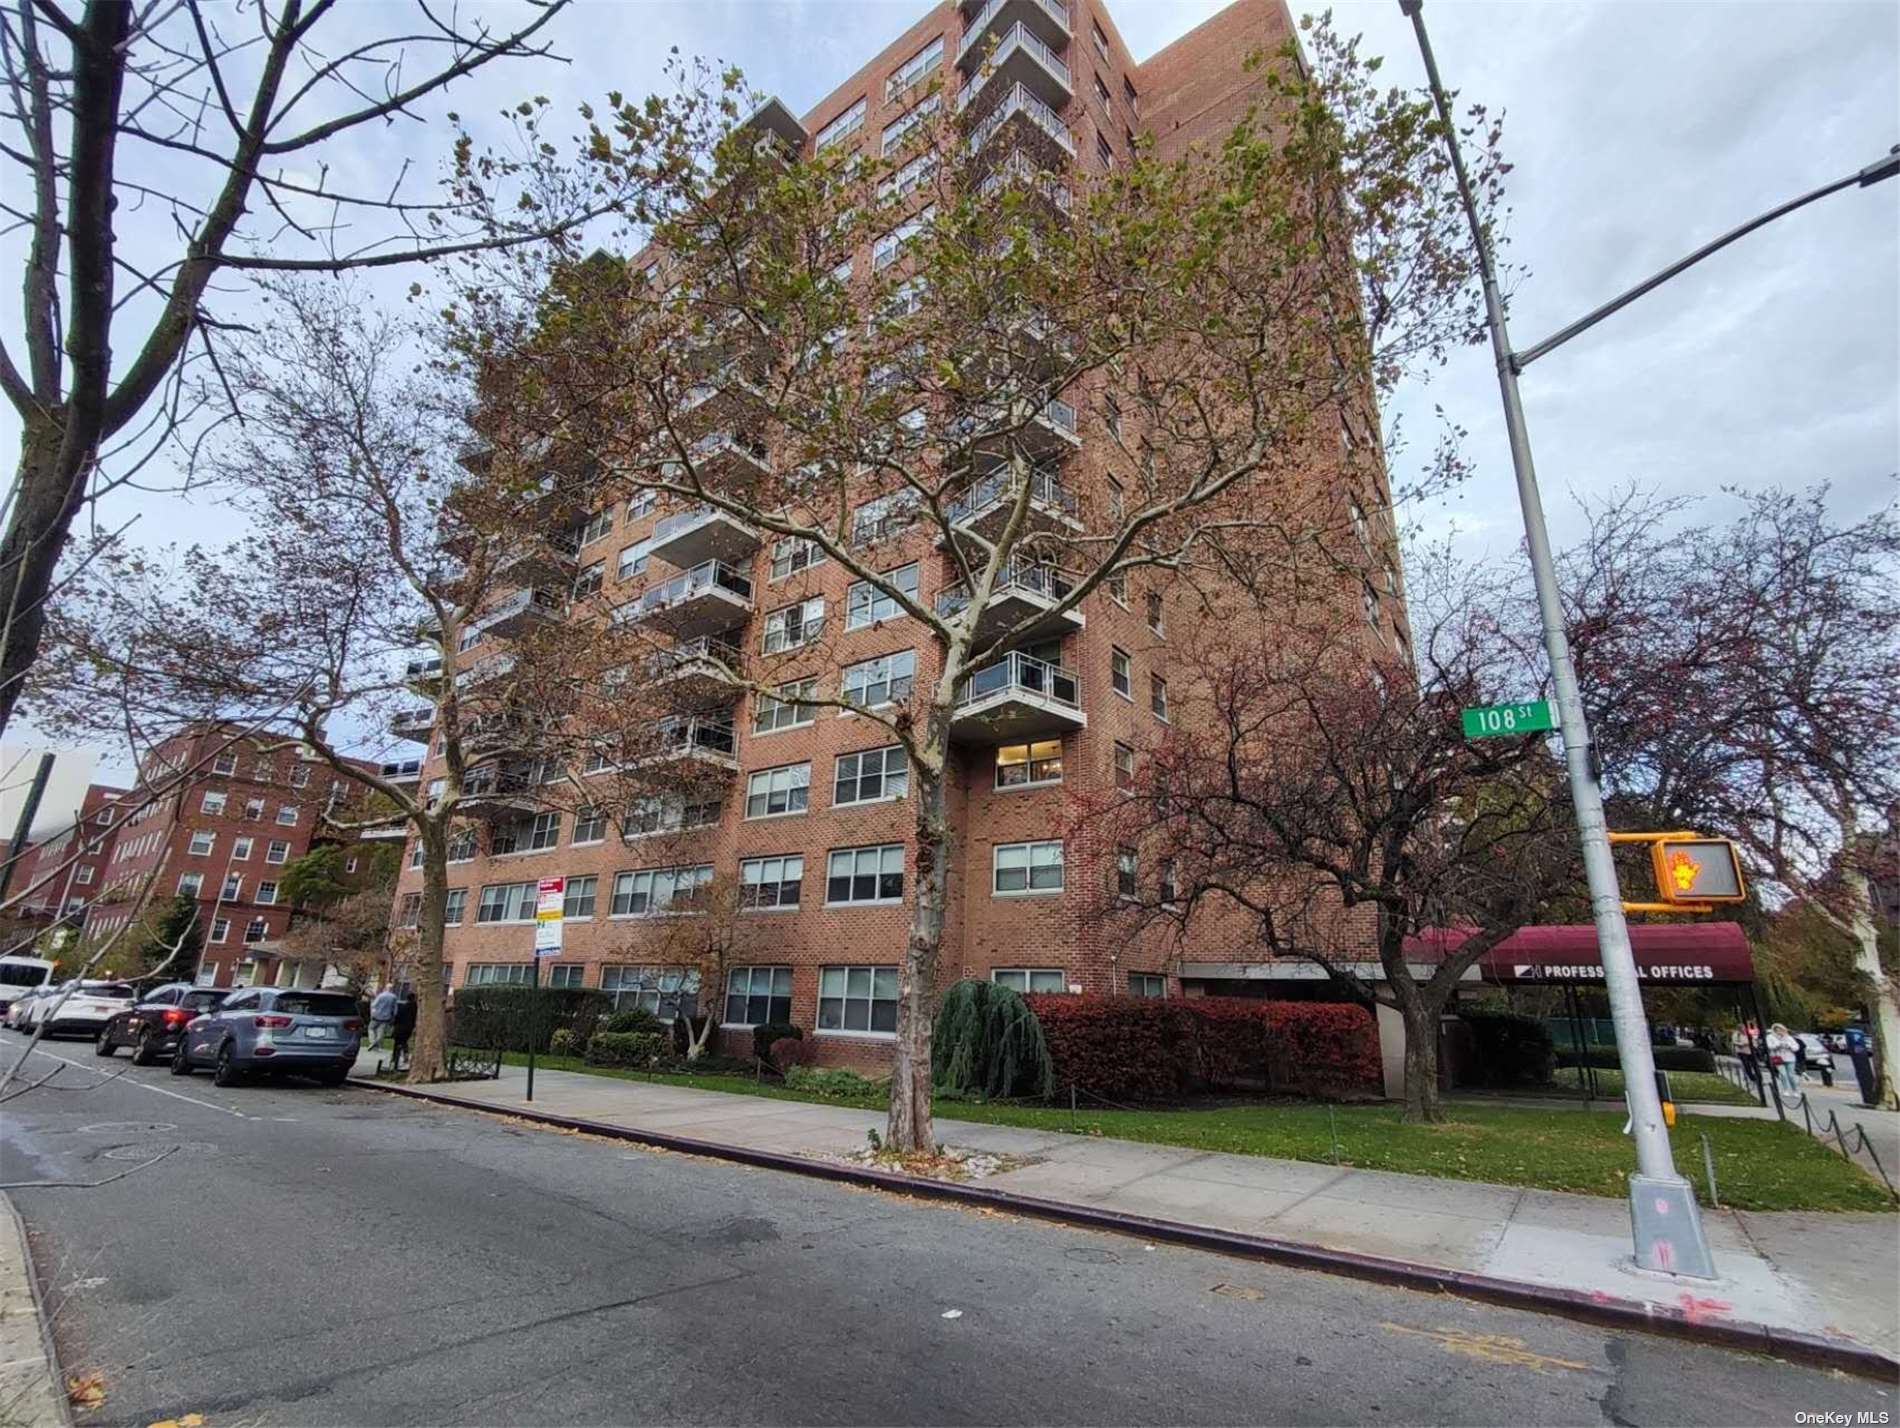 Coop in Forest Hills - 108  Queens, NY 11375